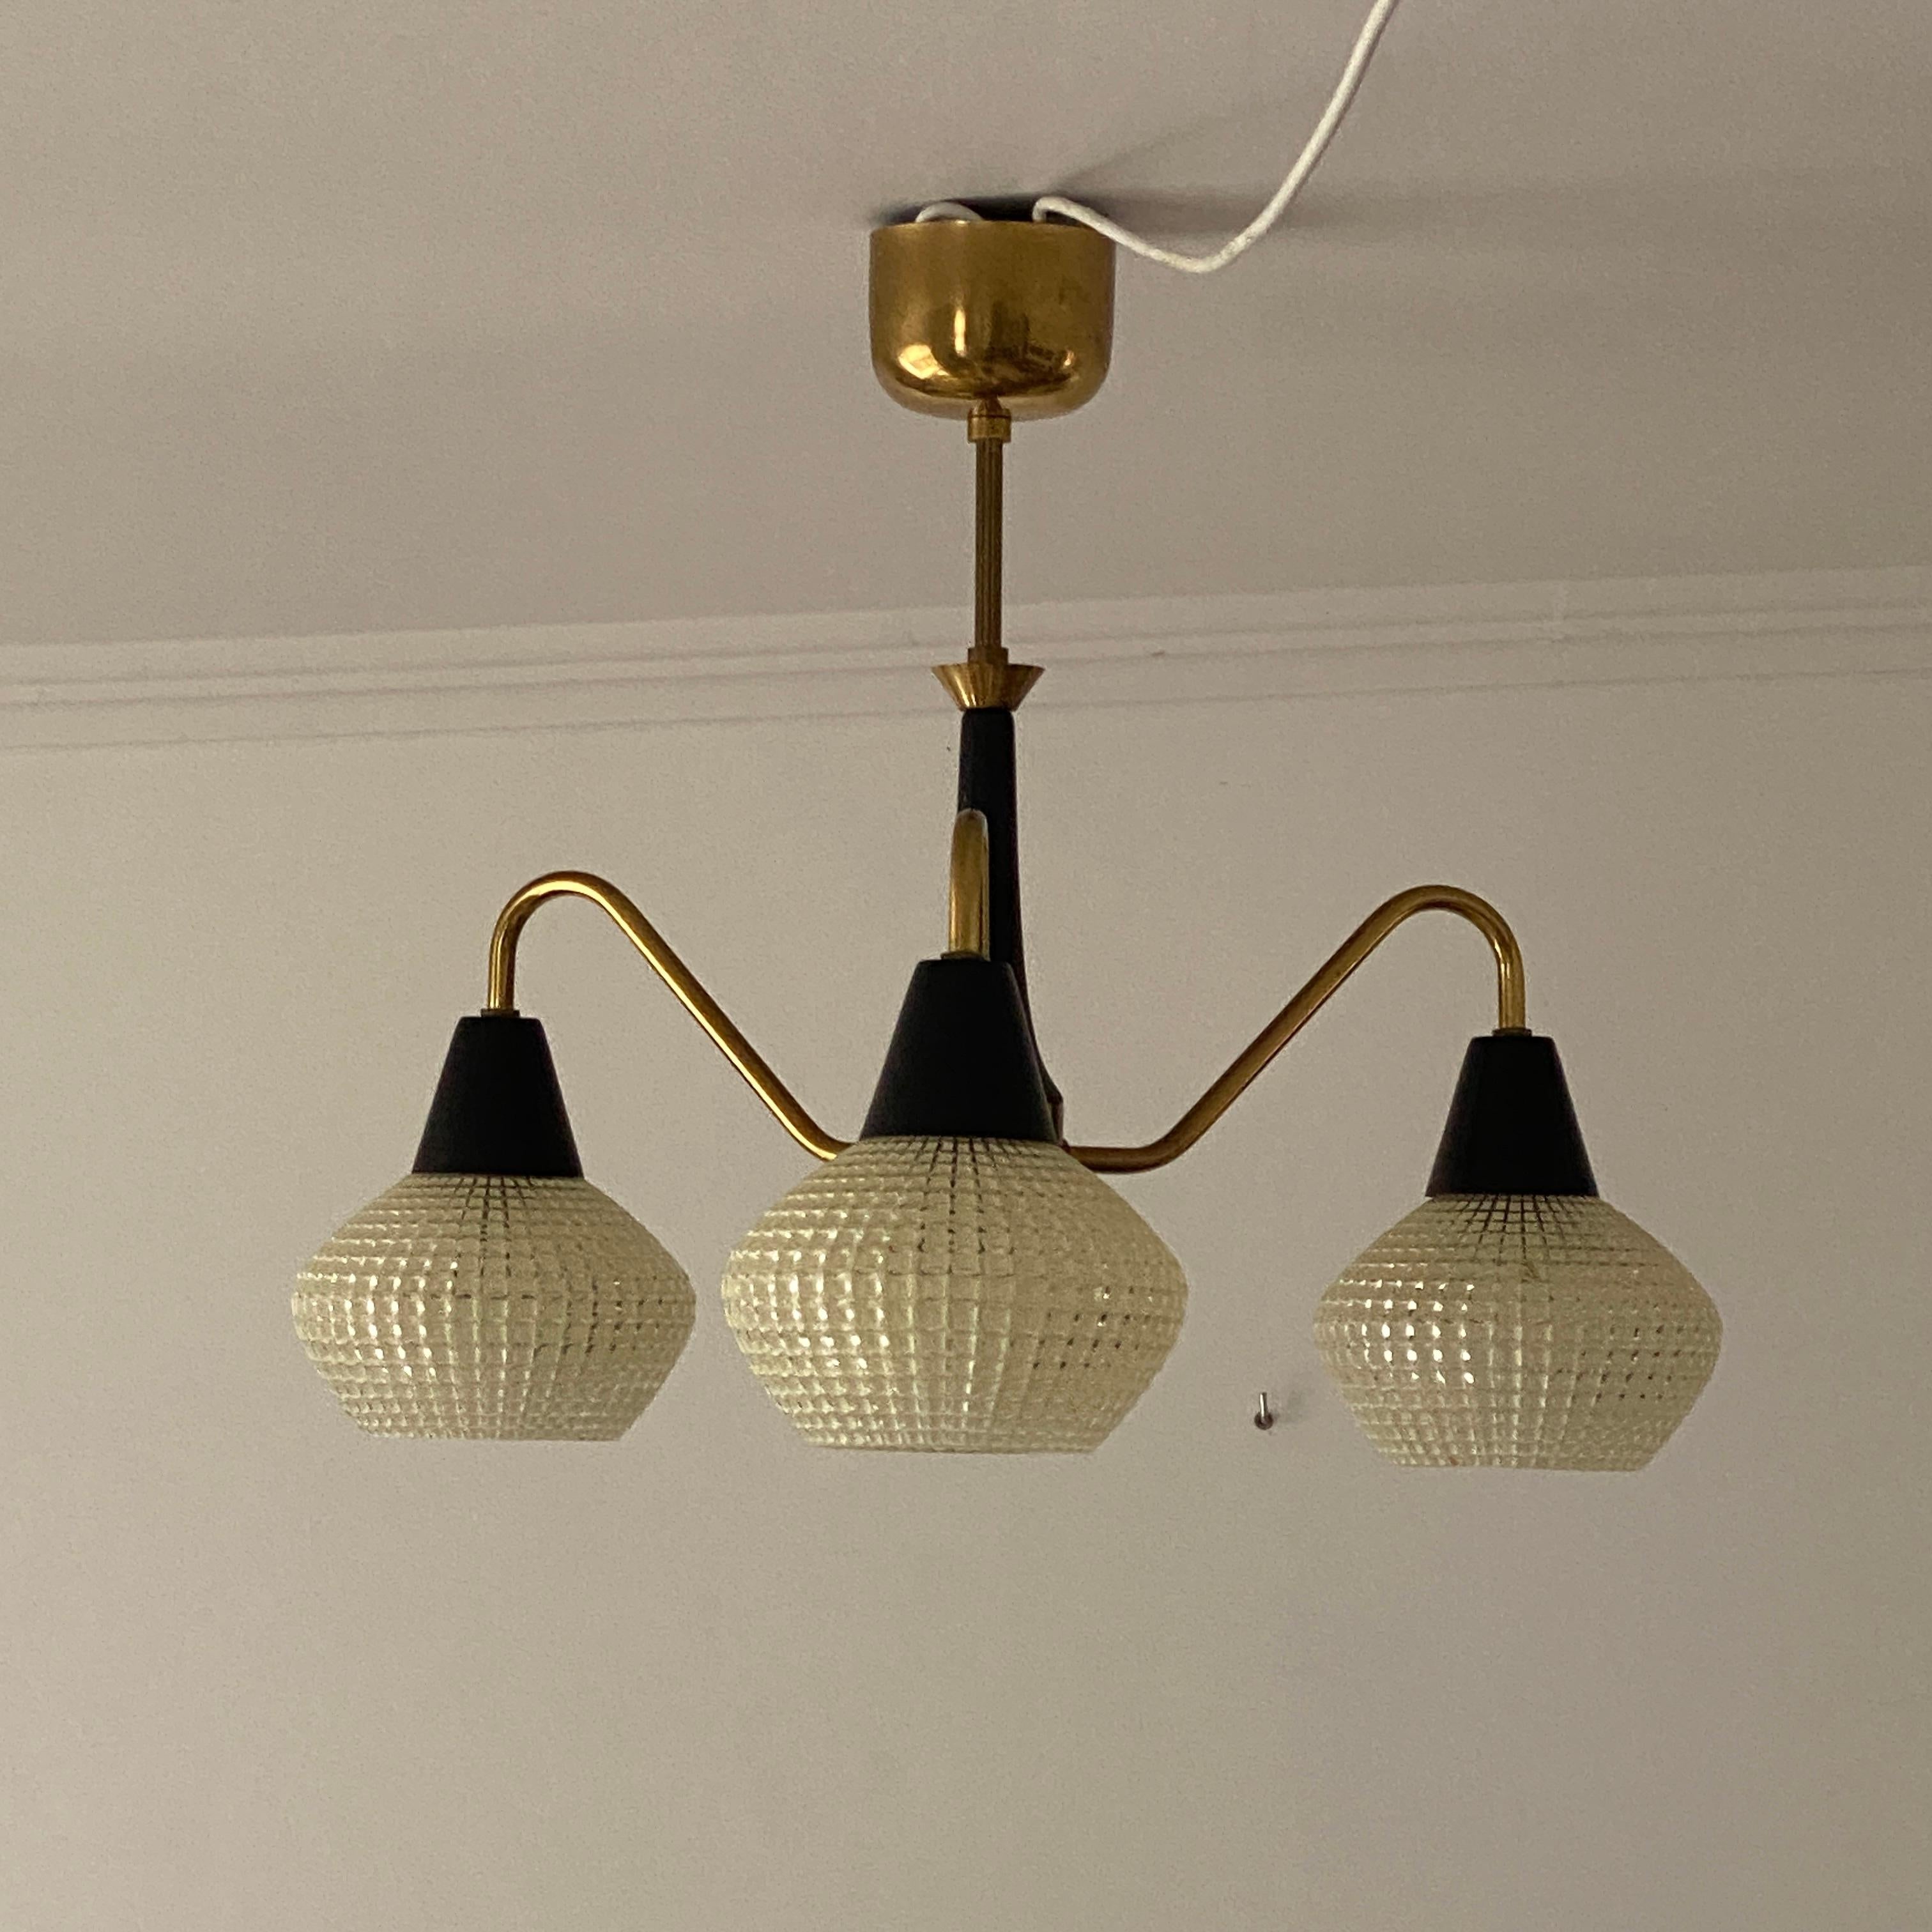 Painted Danish Mid-Century Modern Three-Arm Chandelier with Glass Shades For Sale